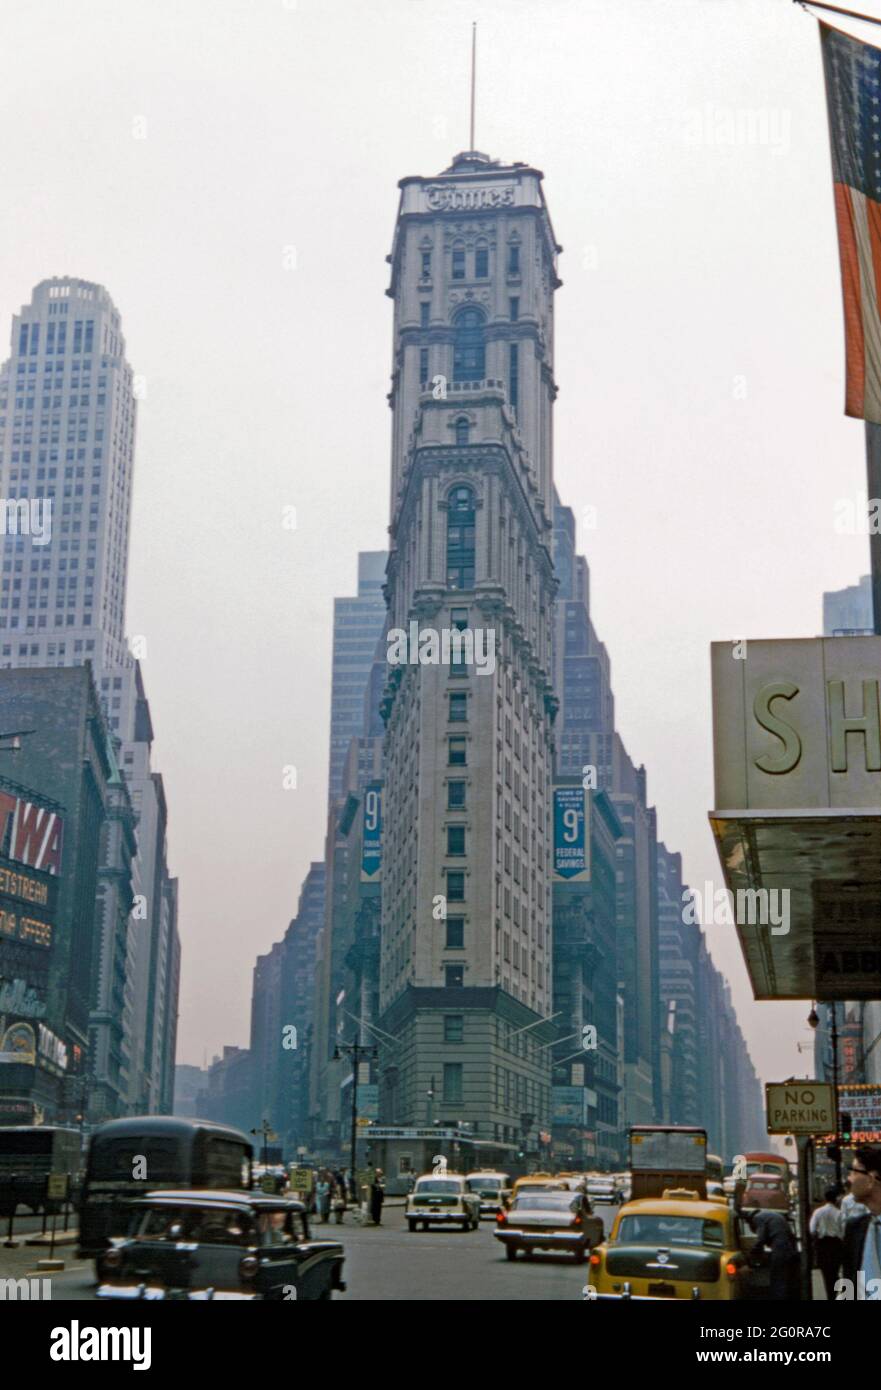 The New York Times building at Times Square, New York City, USA in 1957. Times  Square is a major commercial intersection, tourist destination,  entertainment area in the Midtown Manhattan part of New